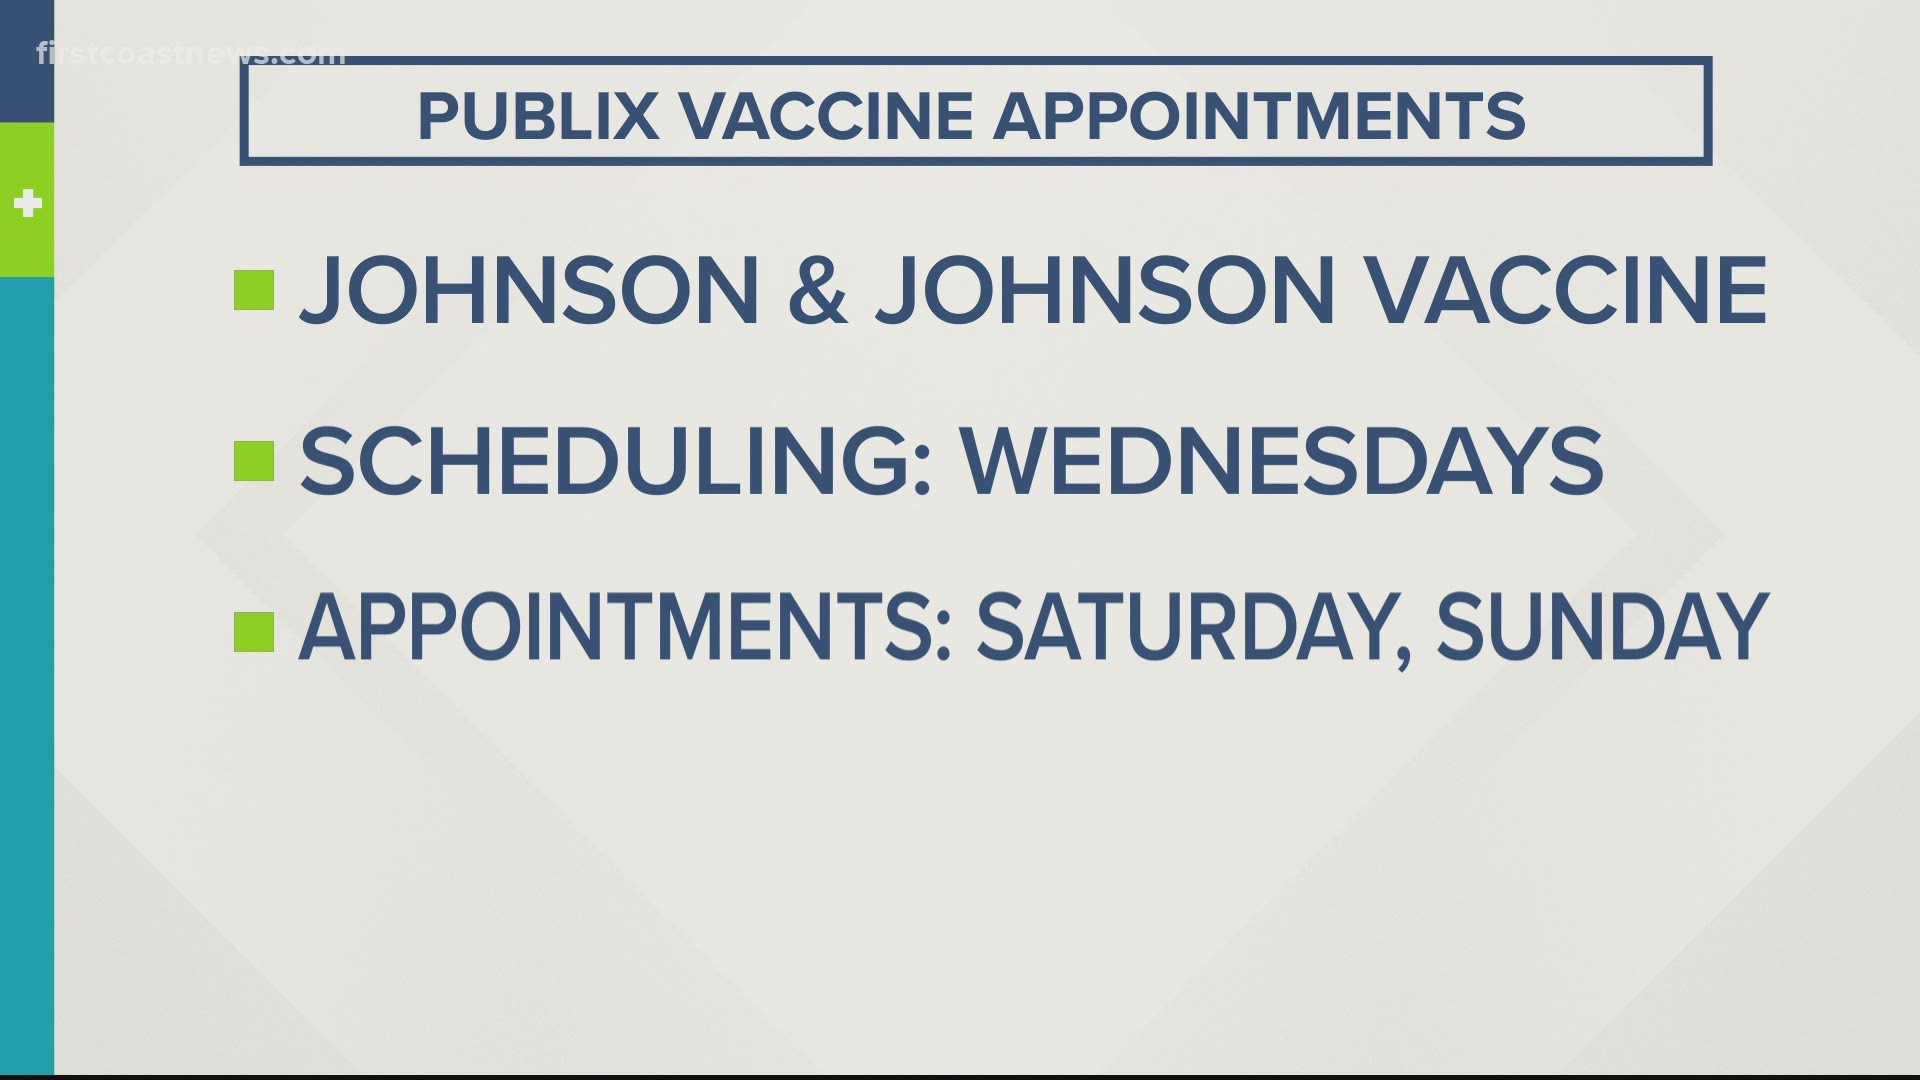 The company also announced they will begin scheduling appointments for people to receive the Johnson & Johnson vaccine.